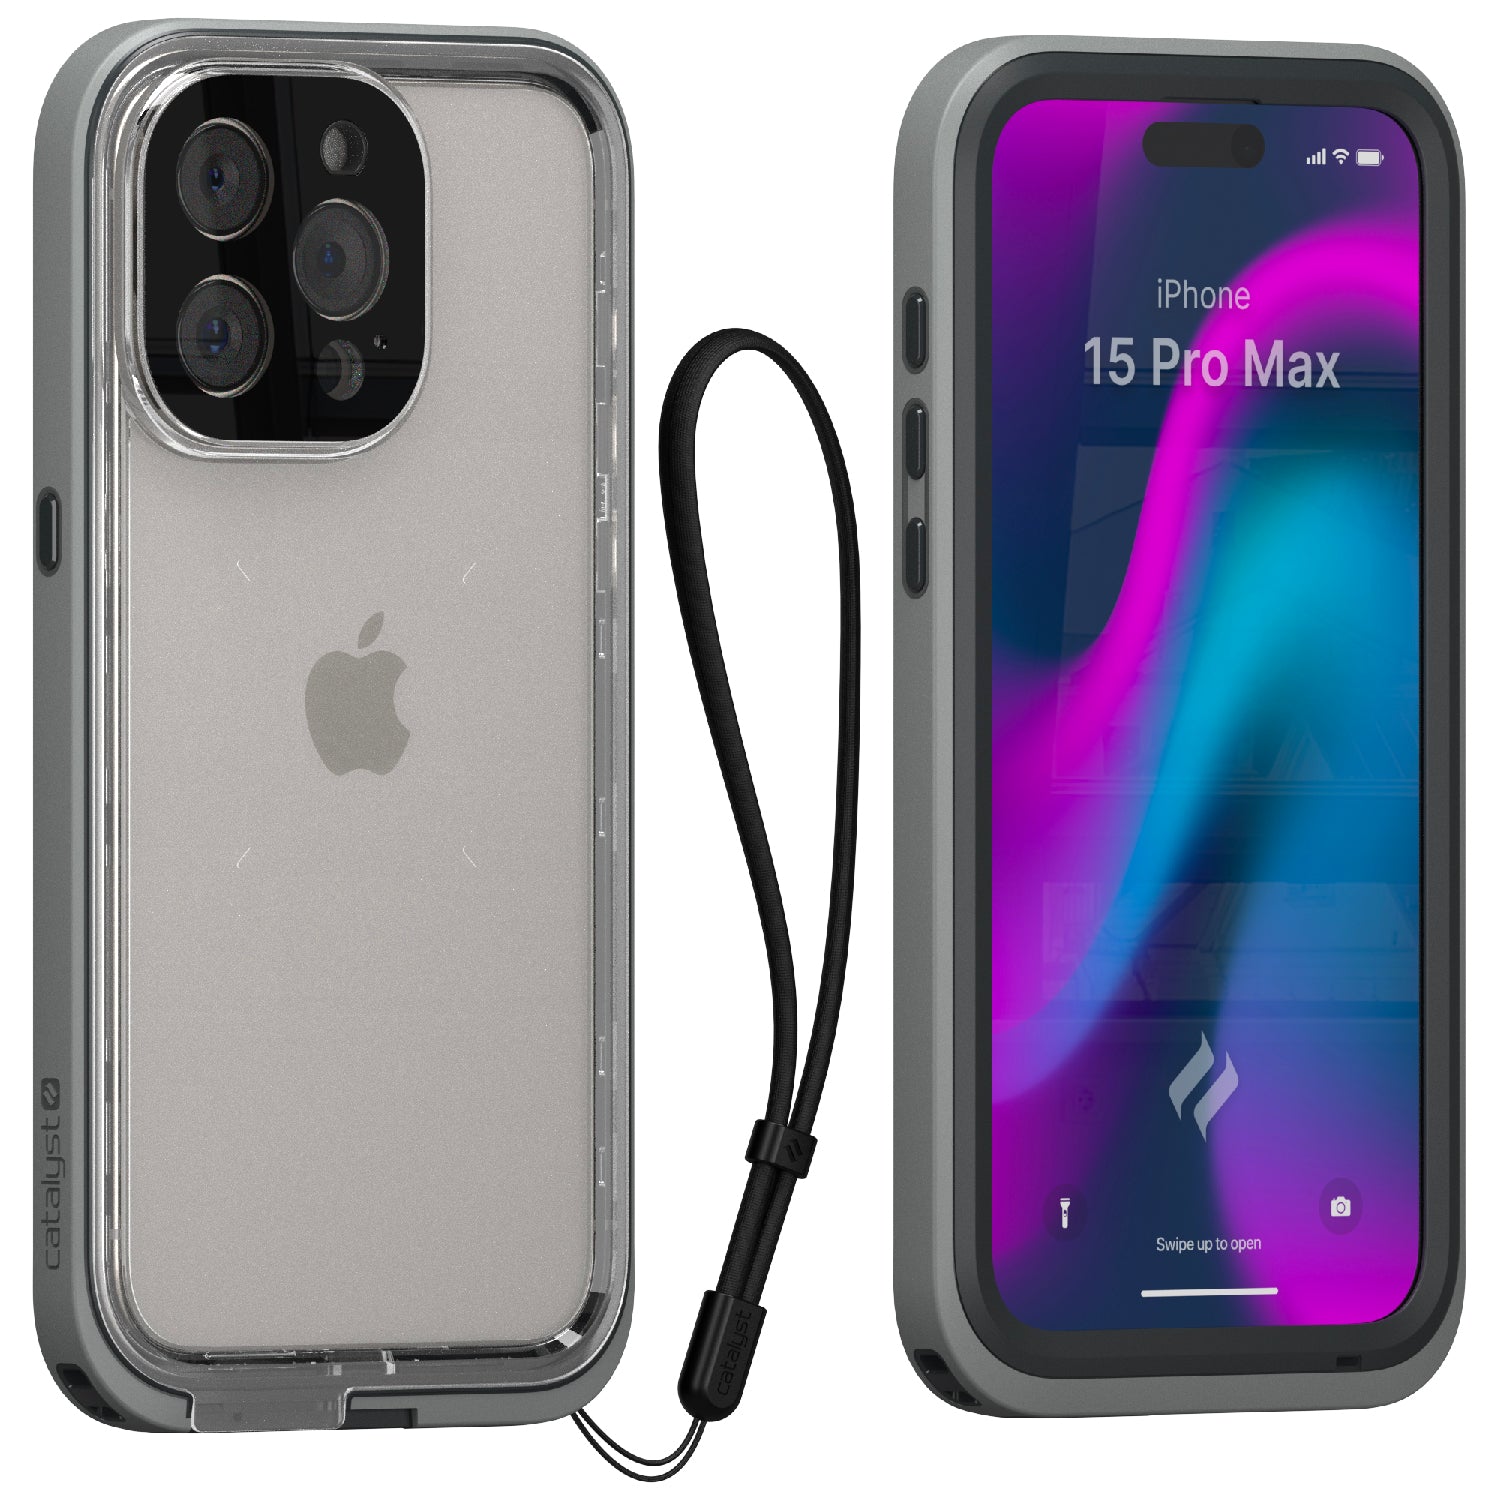 Catalyst iphone 15 pro/15 pro max waterproof case total protection iphone 15 pro showing the case front and back view with lanyard attached